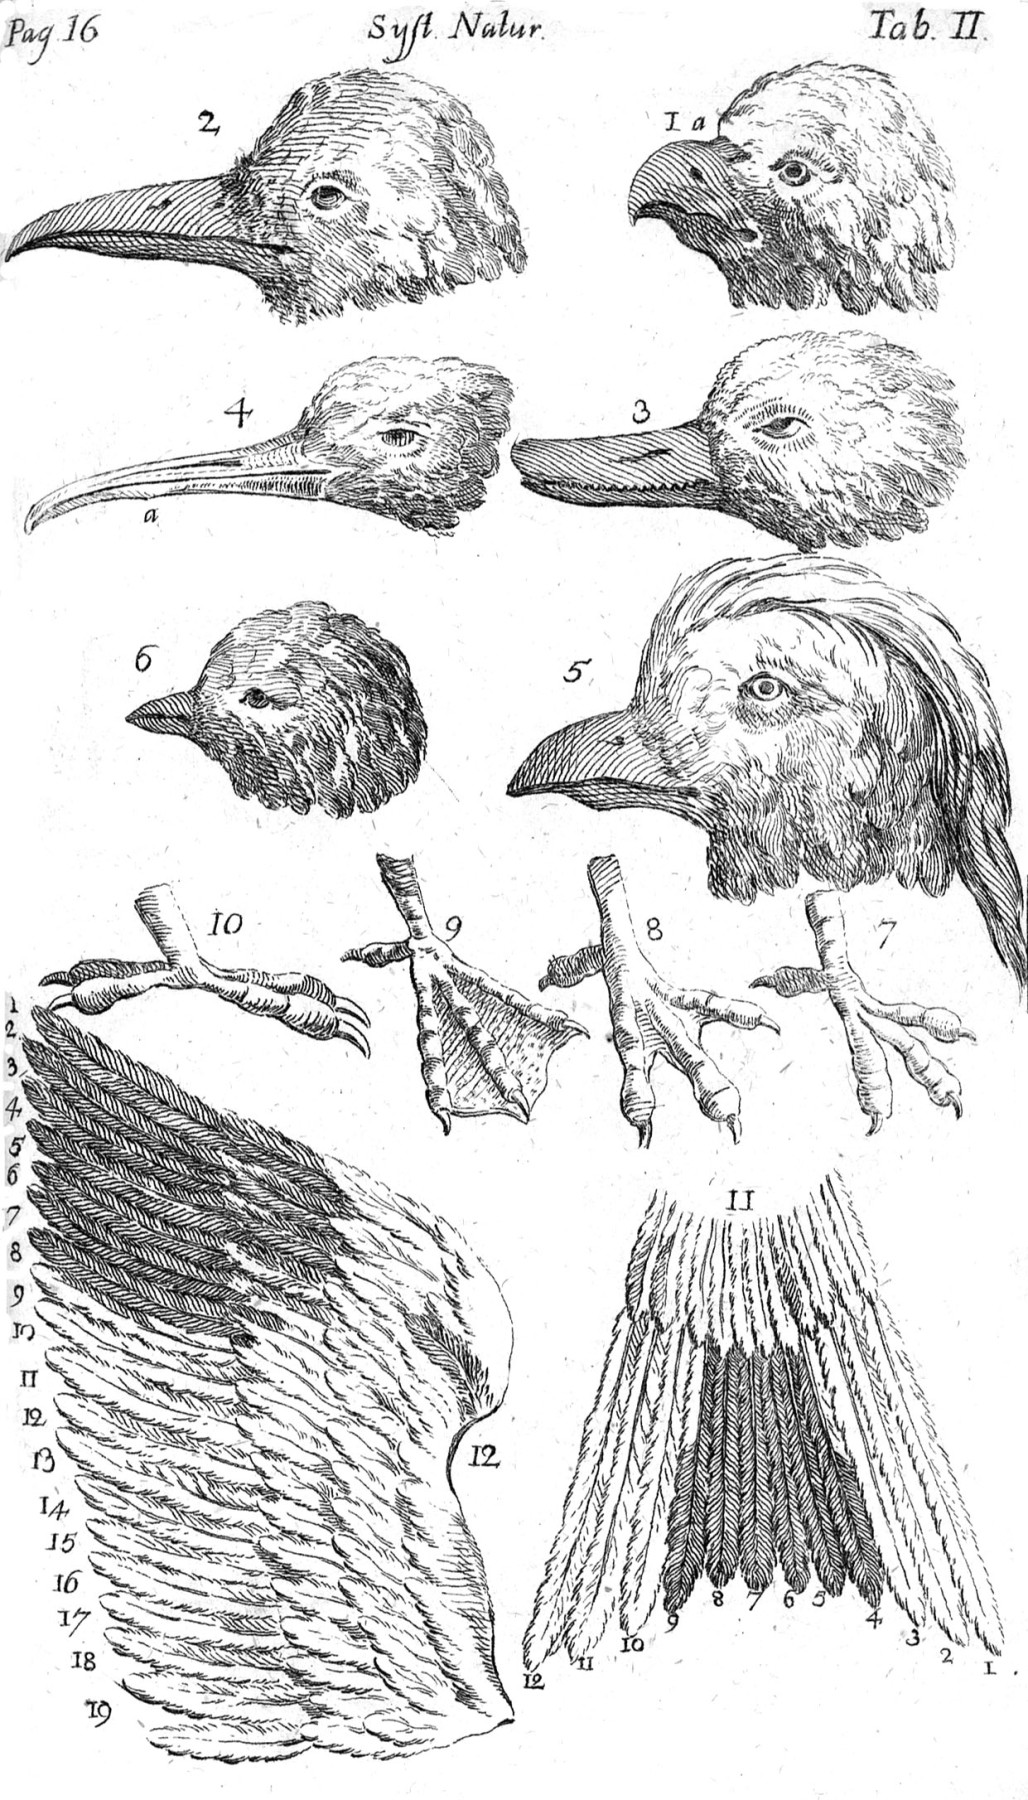 Plate 2 from Linnaeus’ Systema Naturae, 6th edition, 1748. Source: https://commons.wikimedia.org/wiki/File:Systema_Naturae_Plate_II.jpg